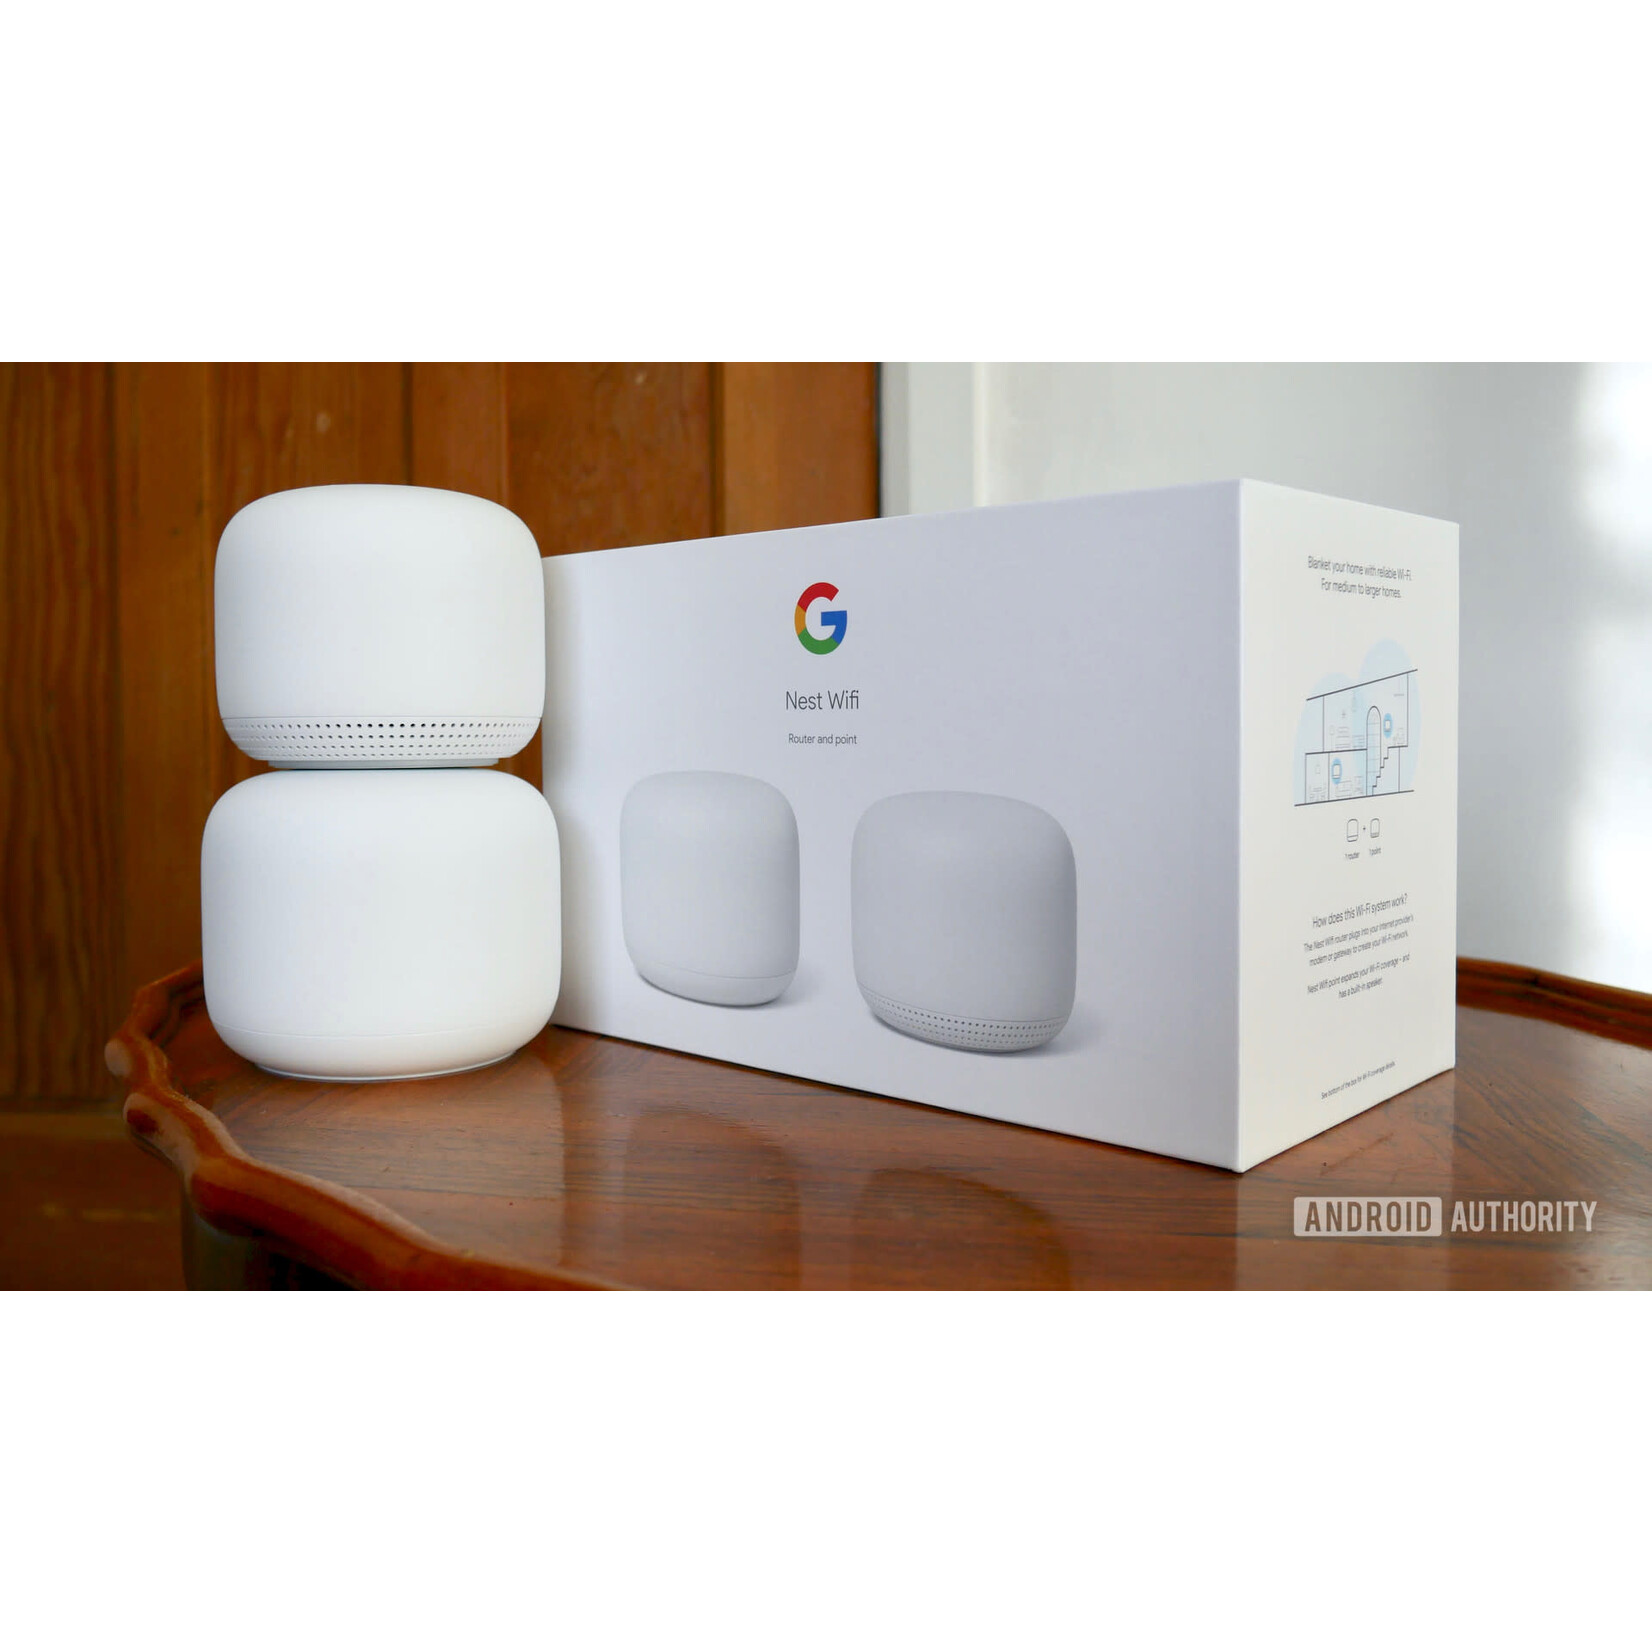 Google Nest Wifi Router - AC2200 Smart Mesh Wi-Fi Router 4-pack